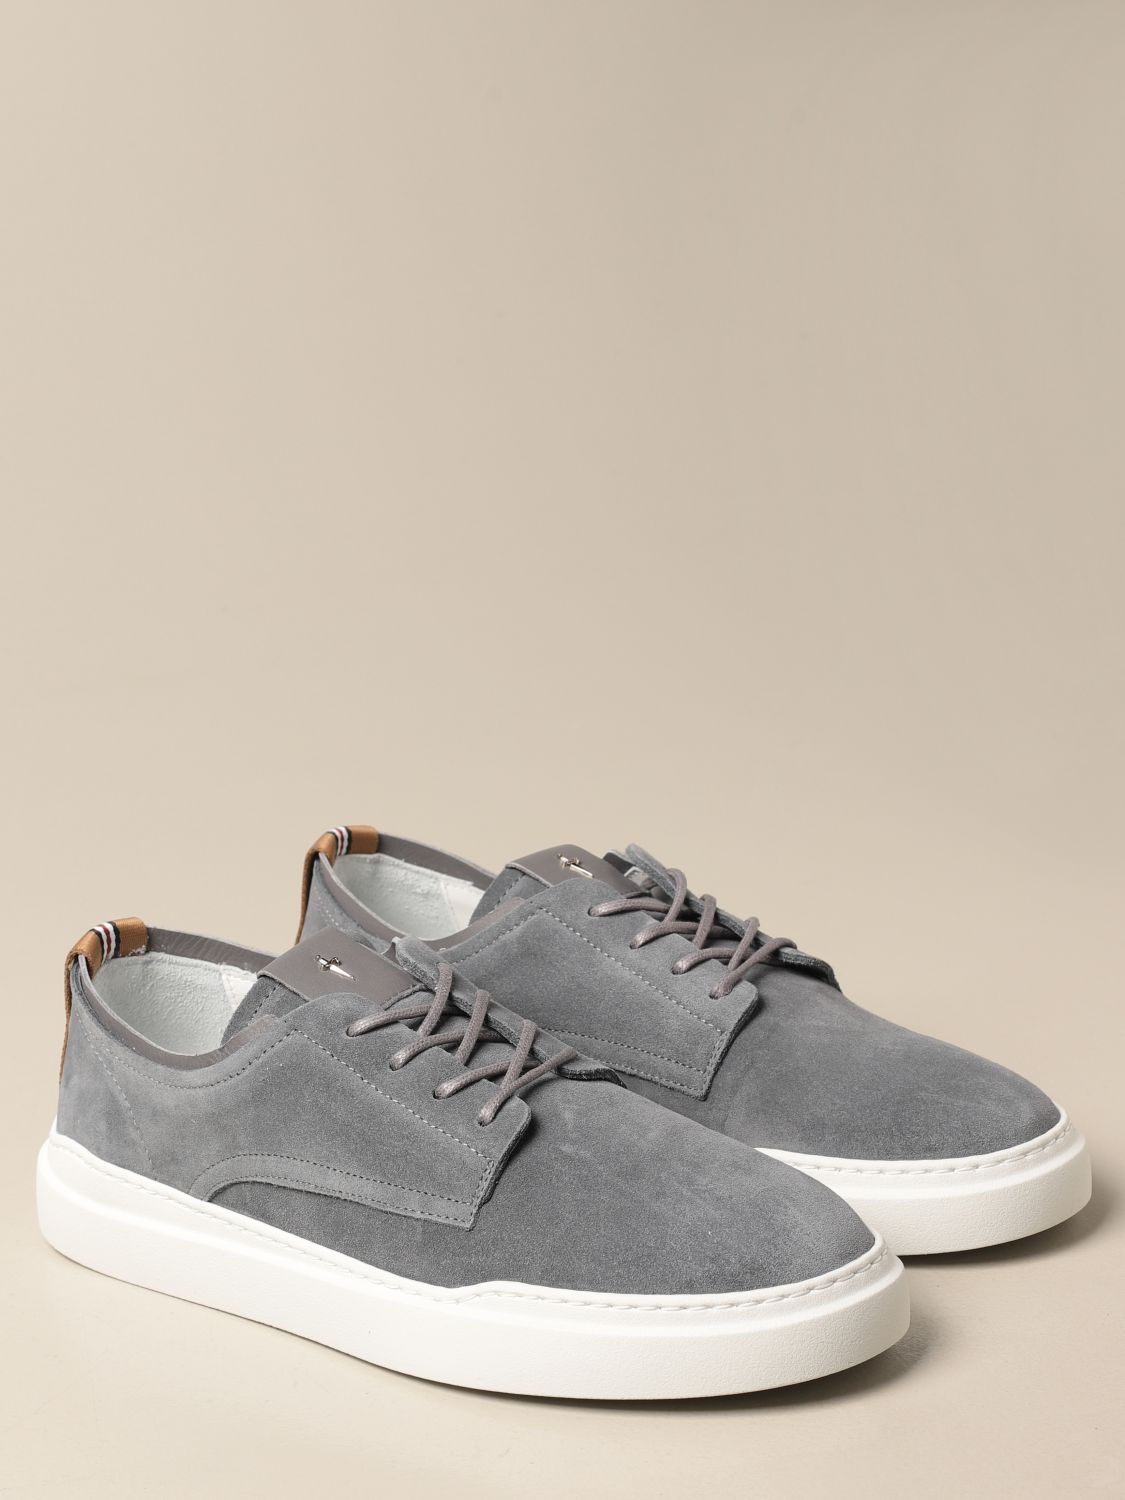 for Men Grey Cesare Paciotti Trainers in Grey Mens Shoes Trainers Low-top trainers 